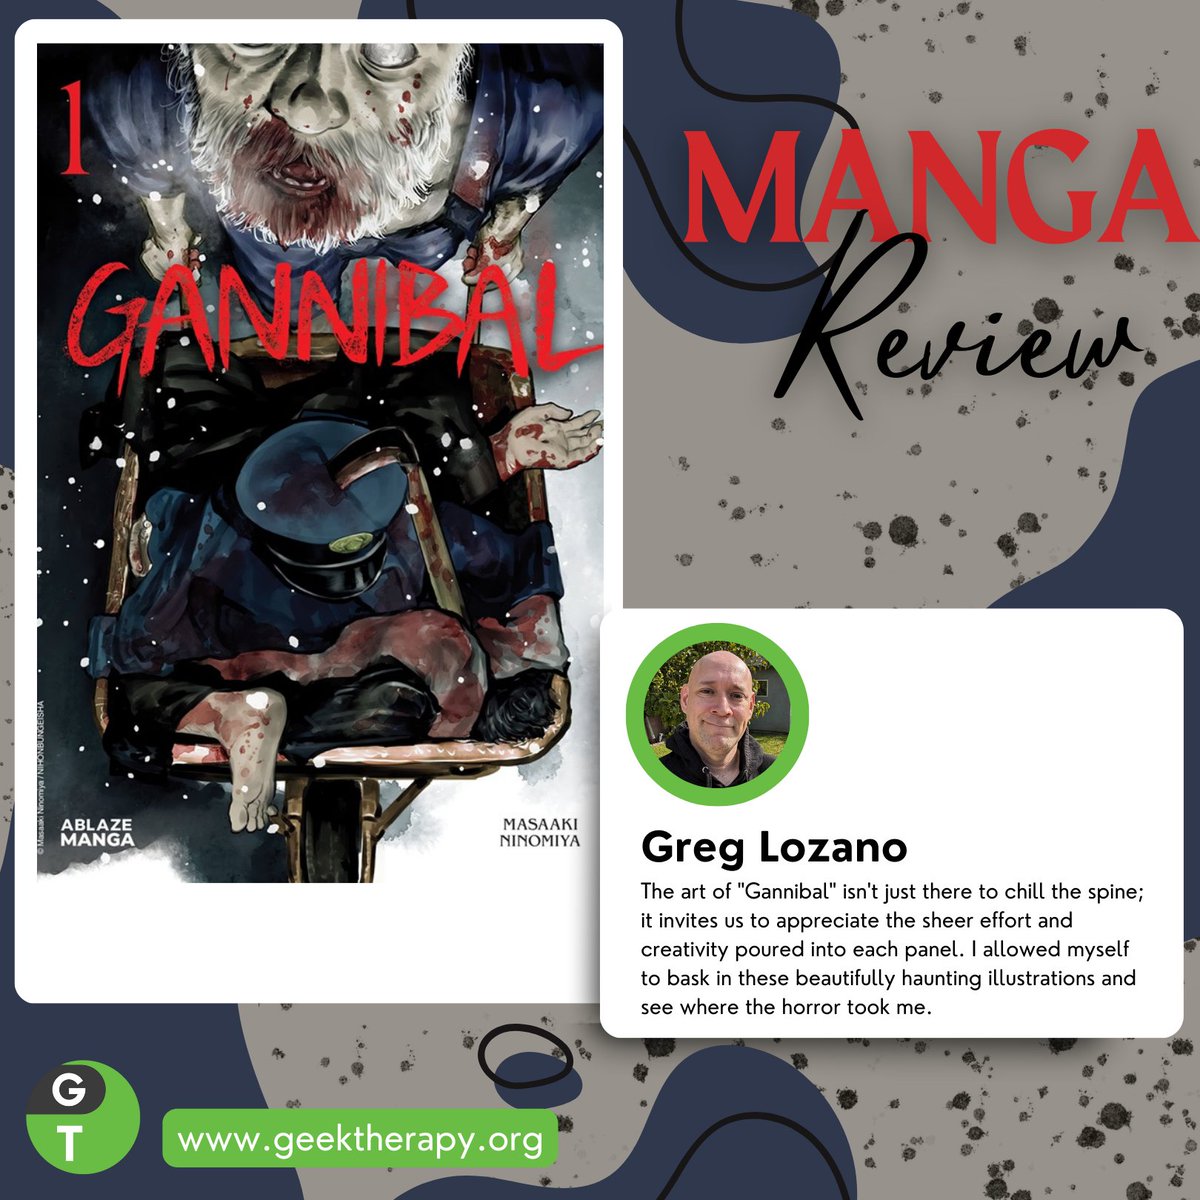 Explore 'Gannibal' in our latest #mangareview! 📖👻 A horror manga with stunning art, offering more than chills. Read the full review today: rfr.bz/tl9w82x

#Horror #GeekTherapy #Suspense #GoodRead